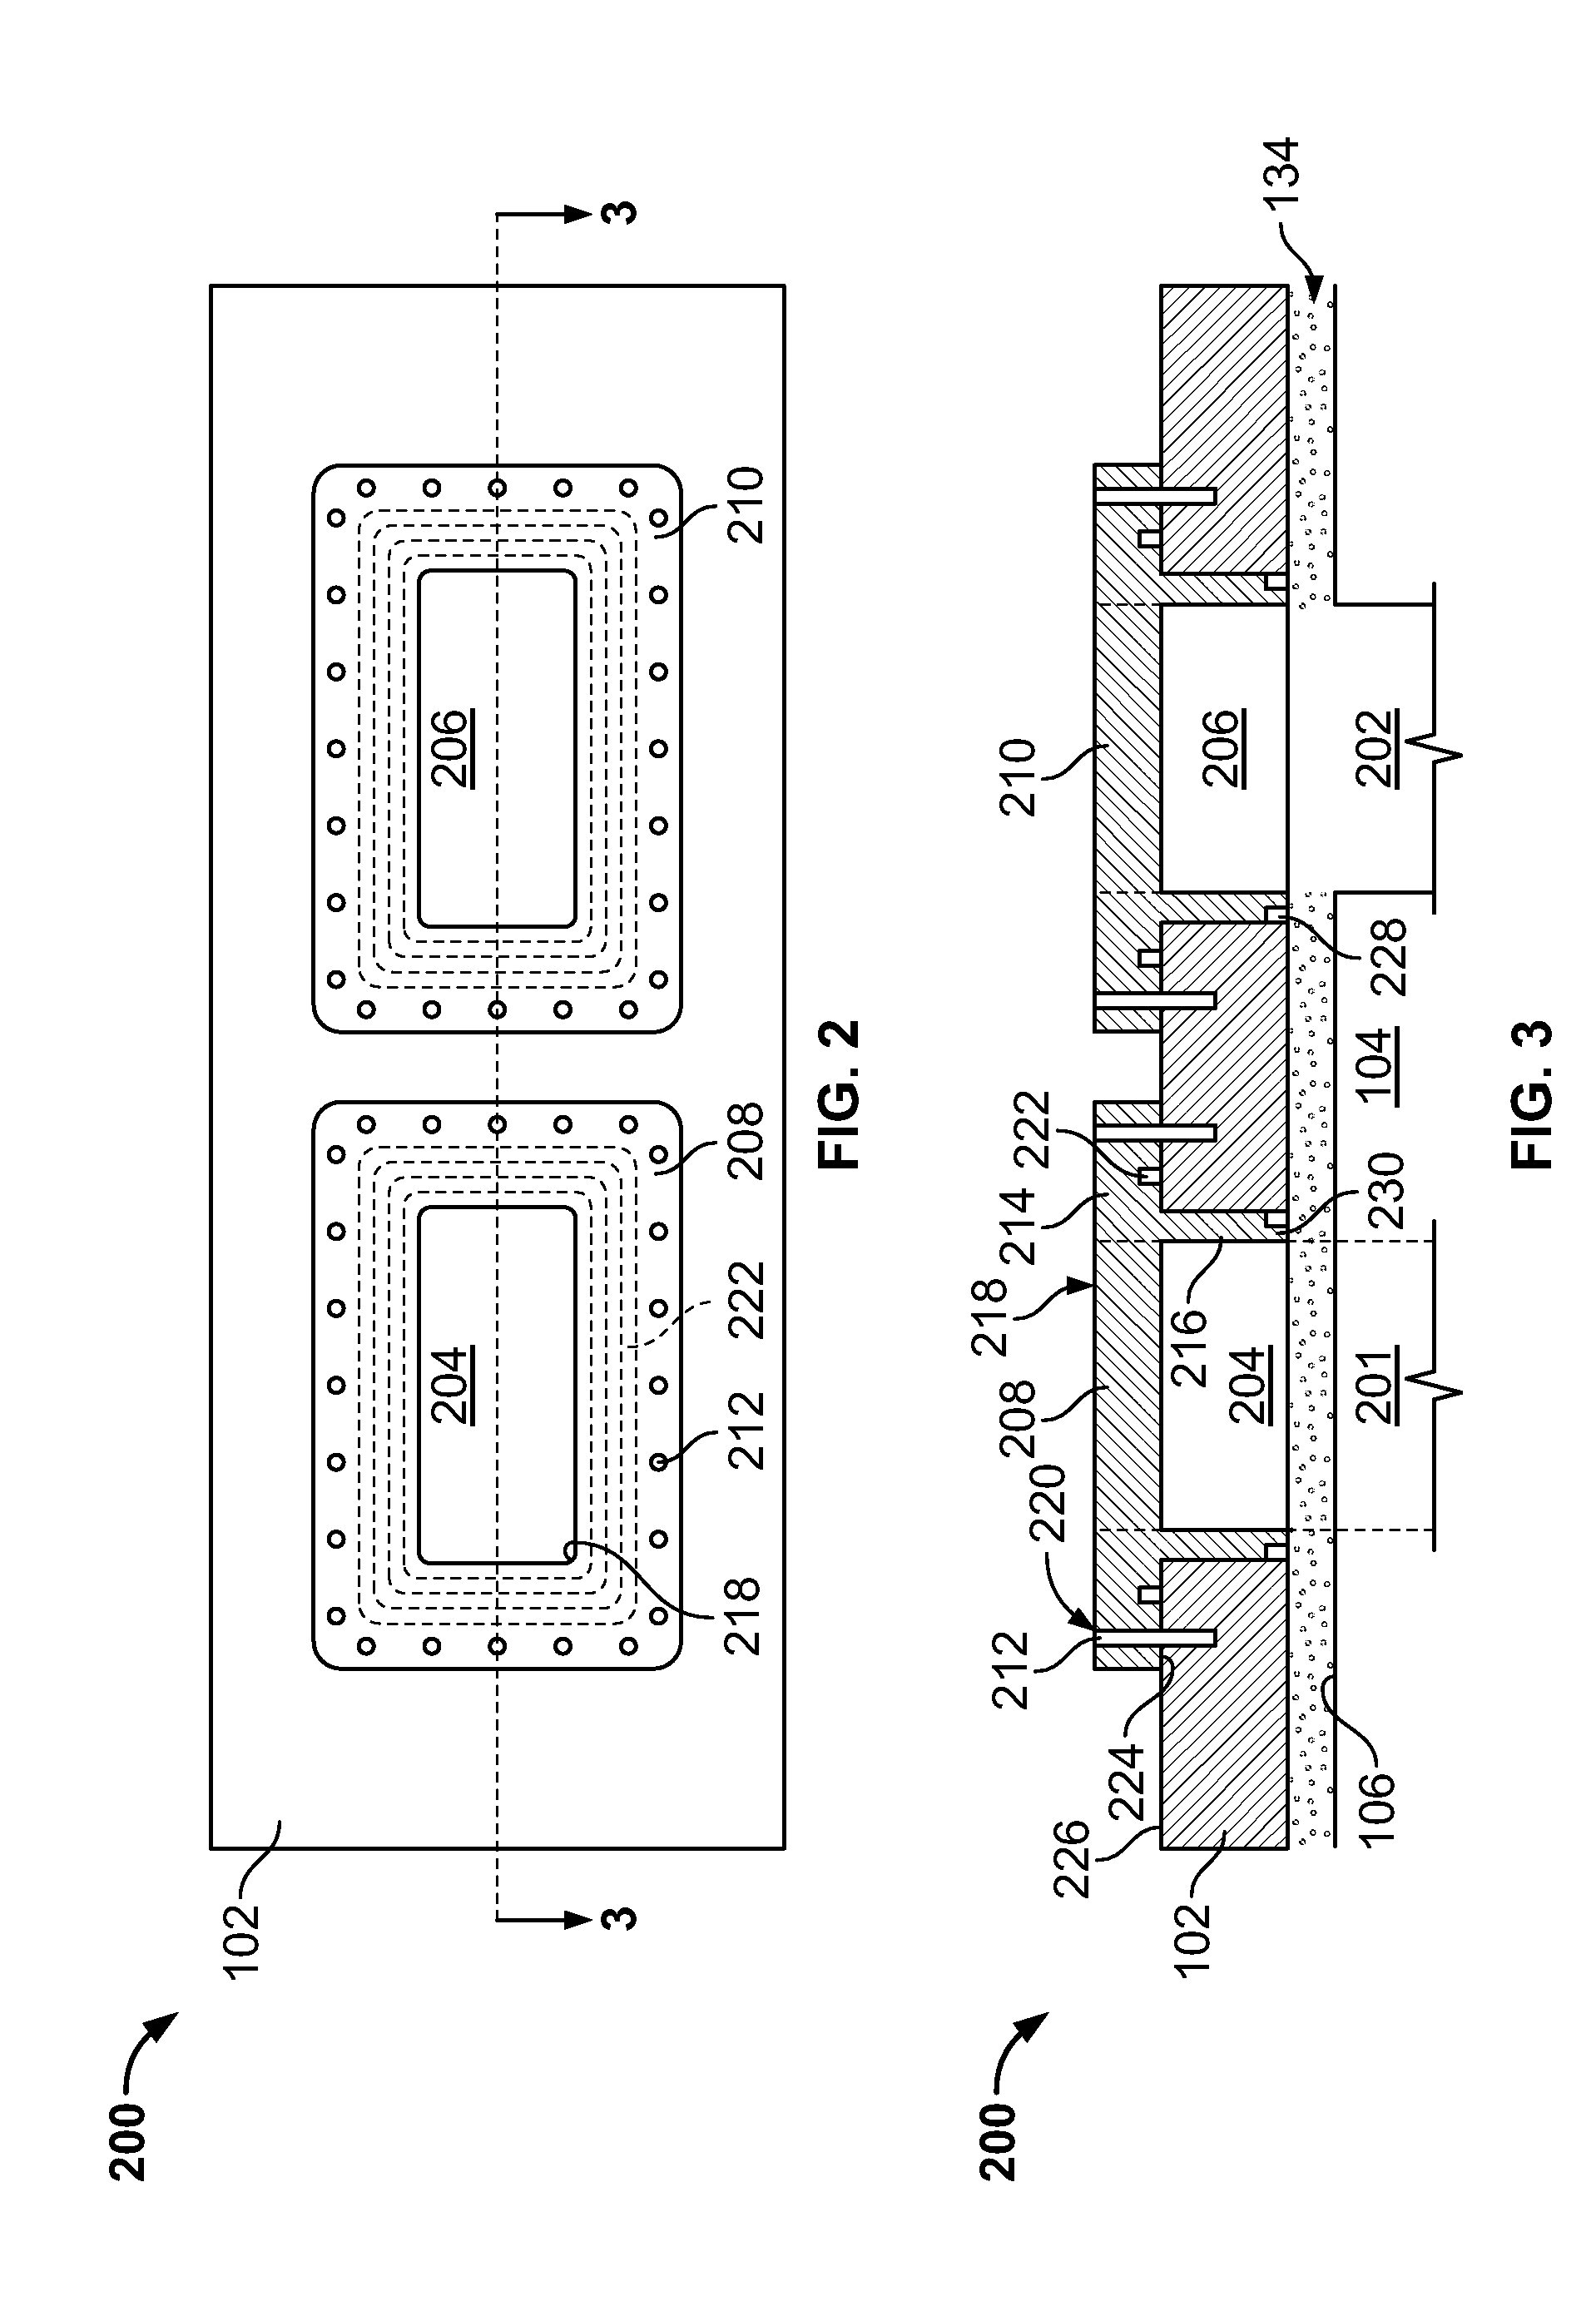 Rotary apparatus for use with a gasifier system and methods of using the same